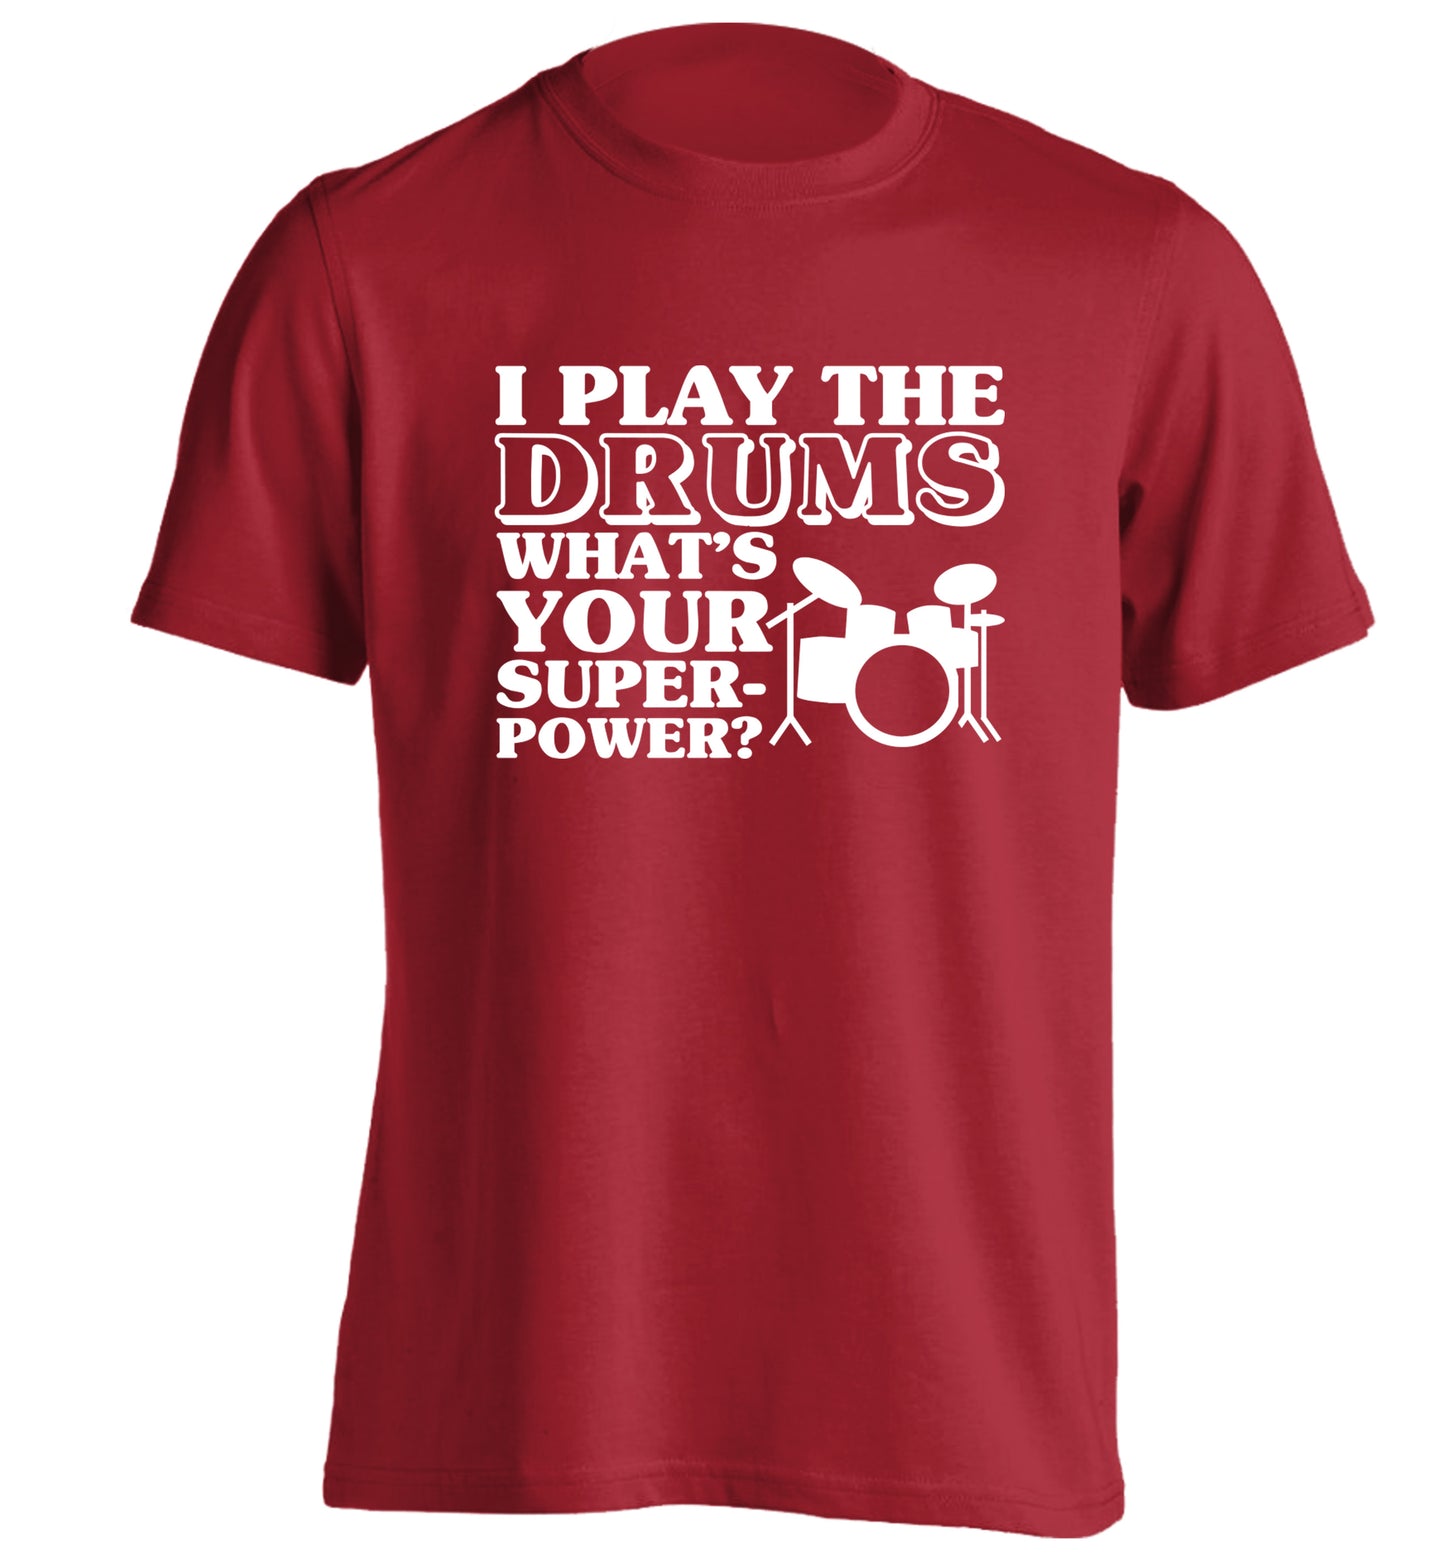 I play the drums what's your superpower? adults unisexred Tshirt 2XL